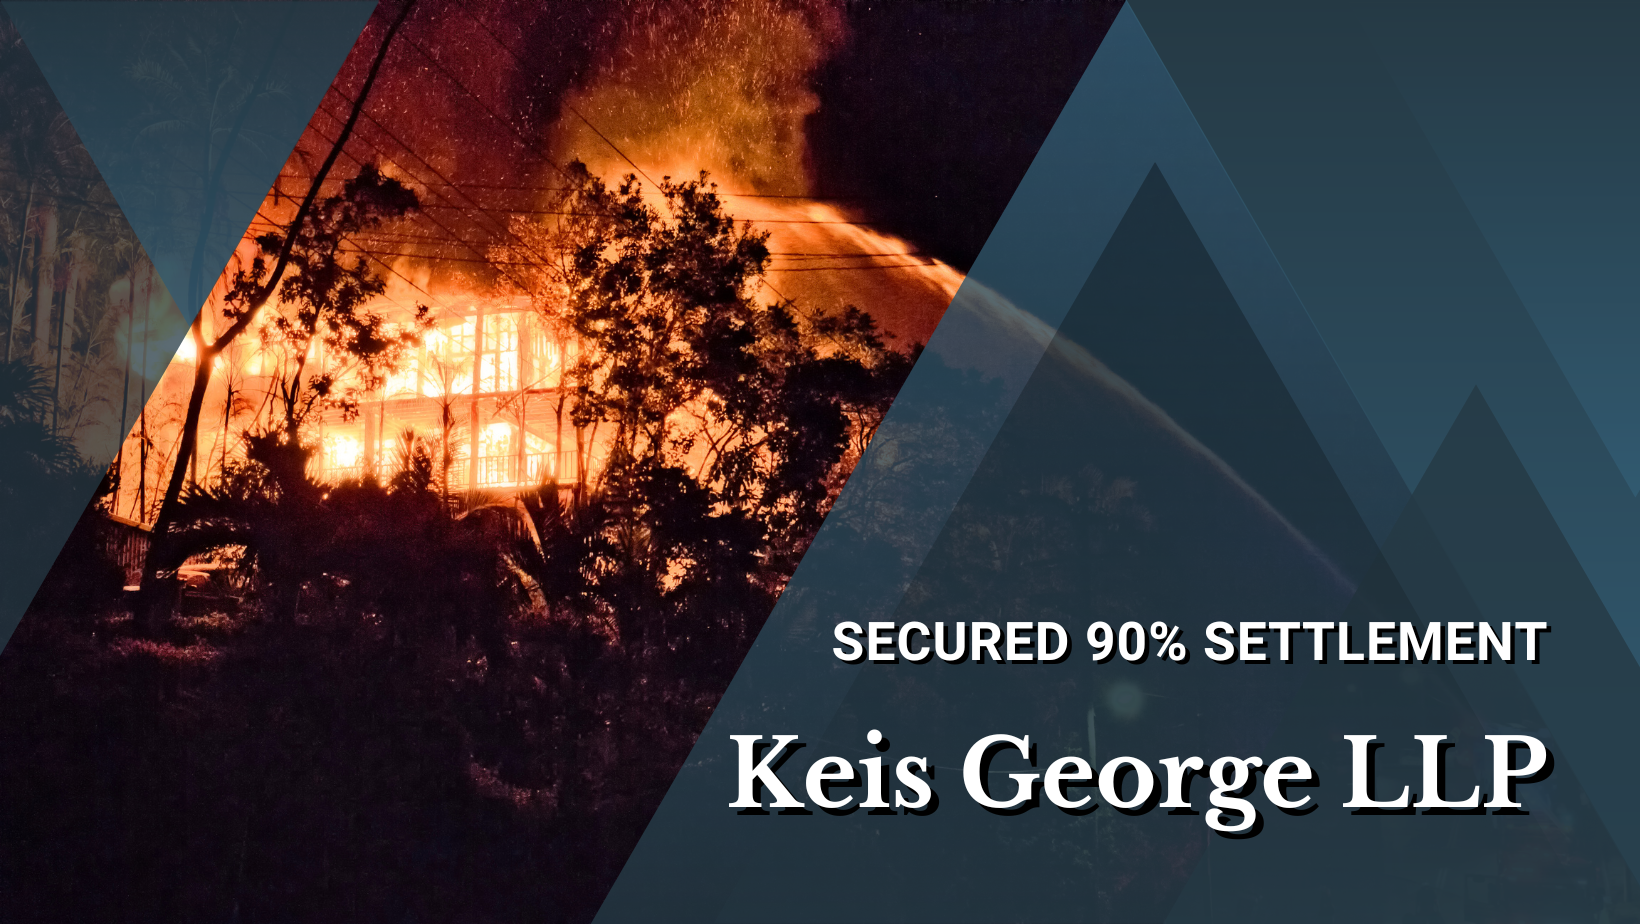 Banner of a house on fire with trees surrounding the home as geometric shades of blue form a perimeter around the image with text reading keis george llp secures 90% settlement